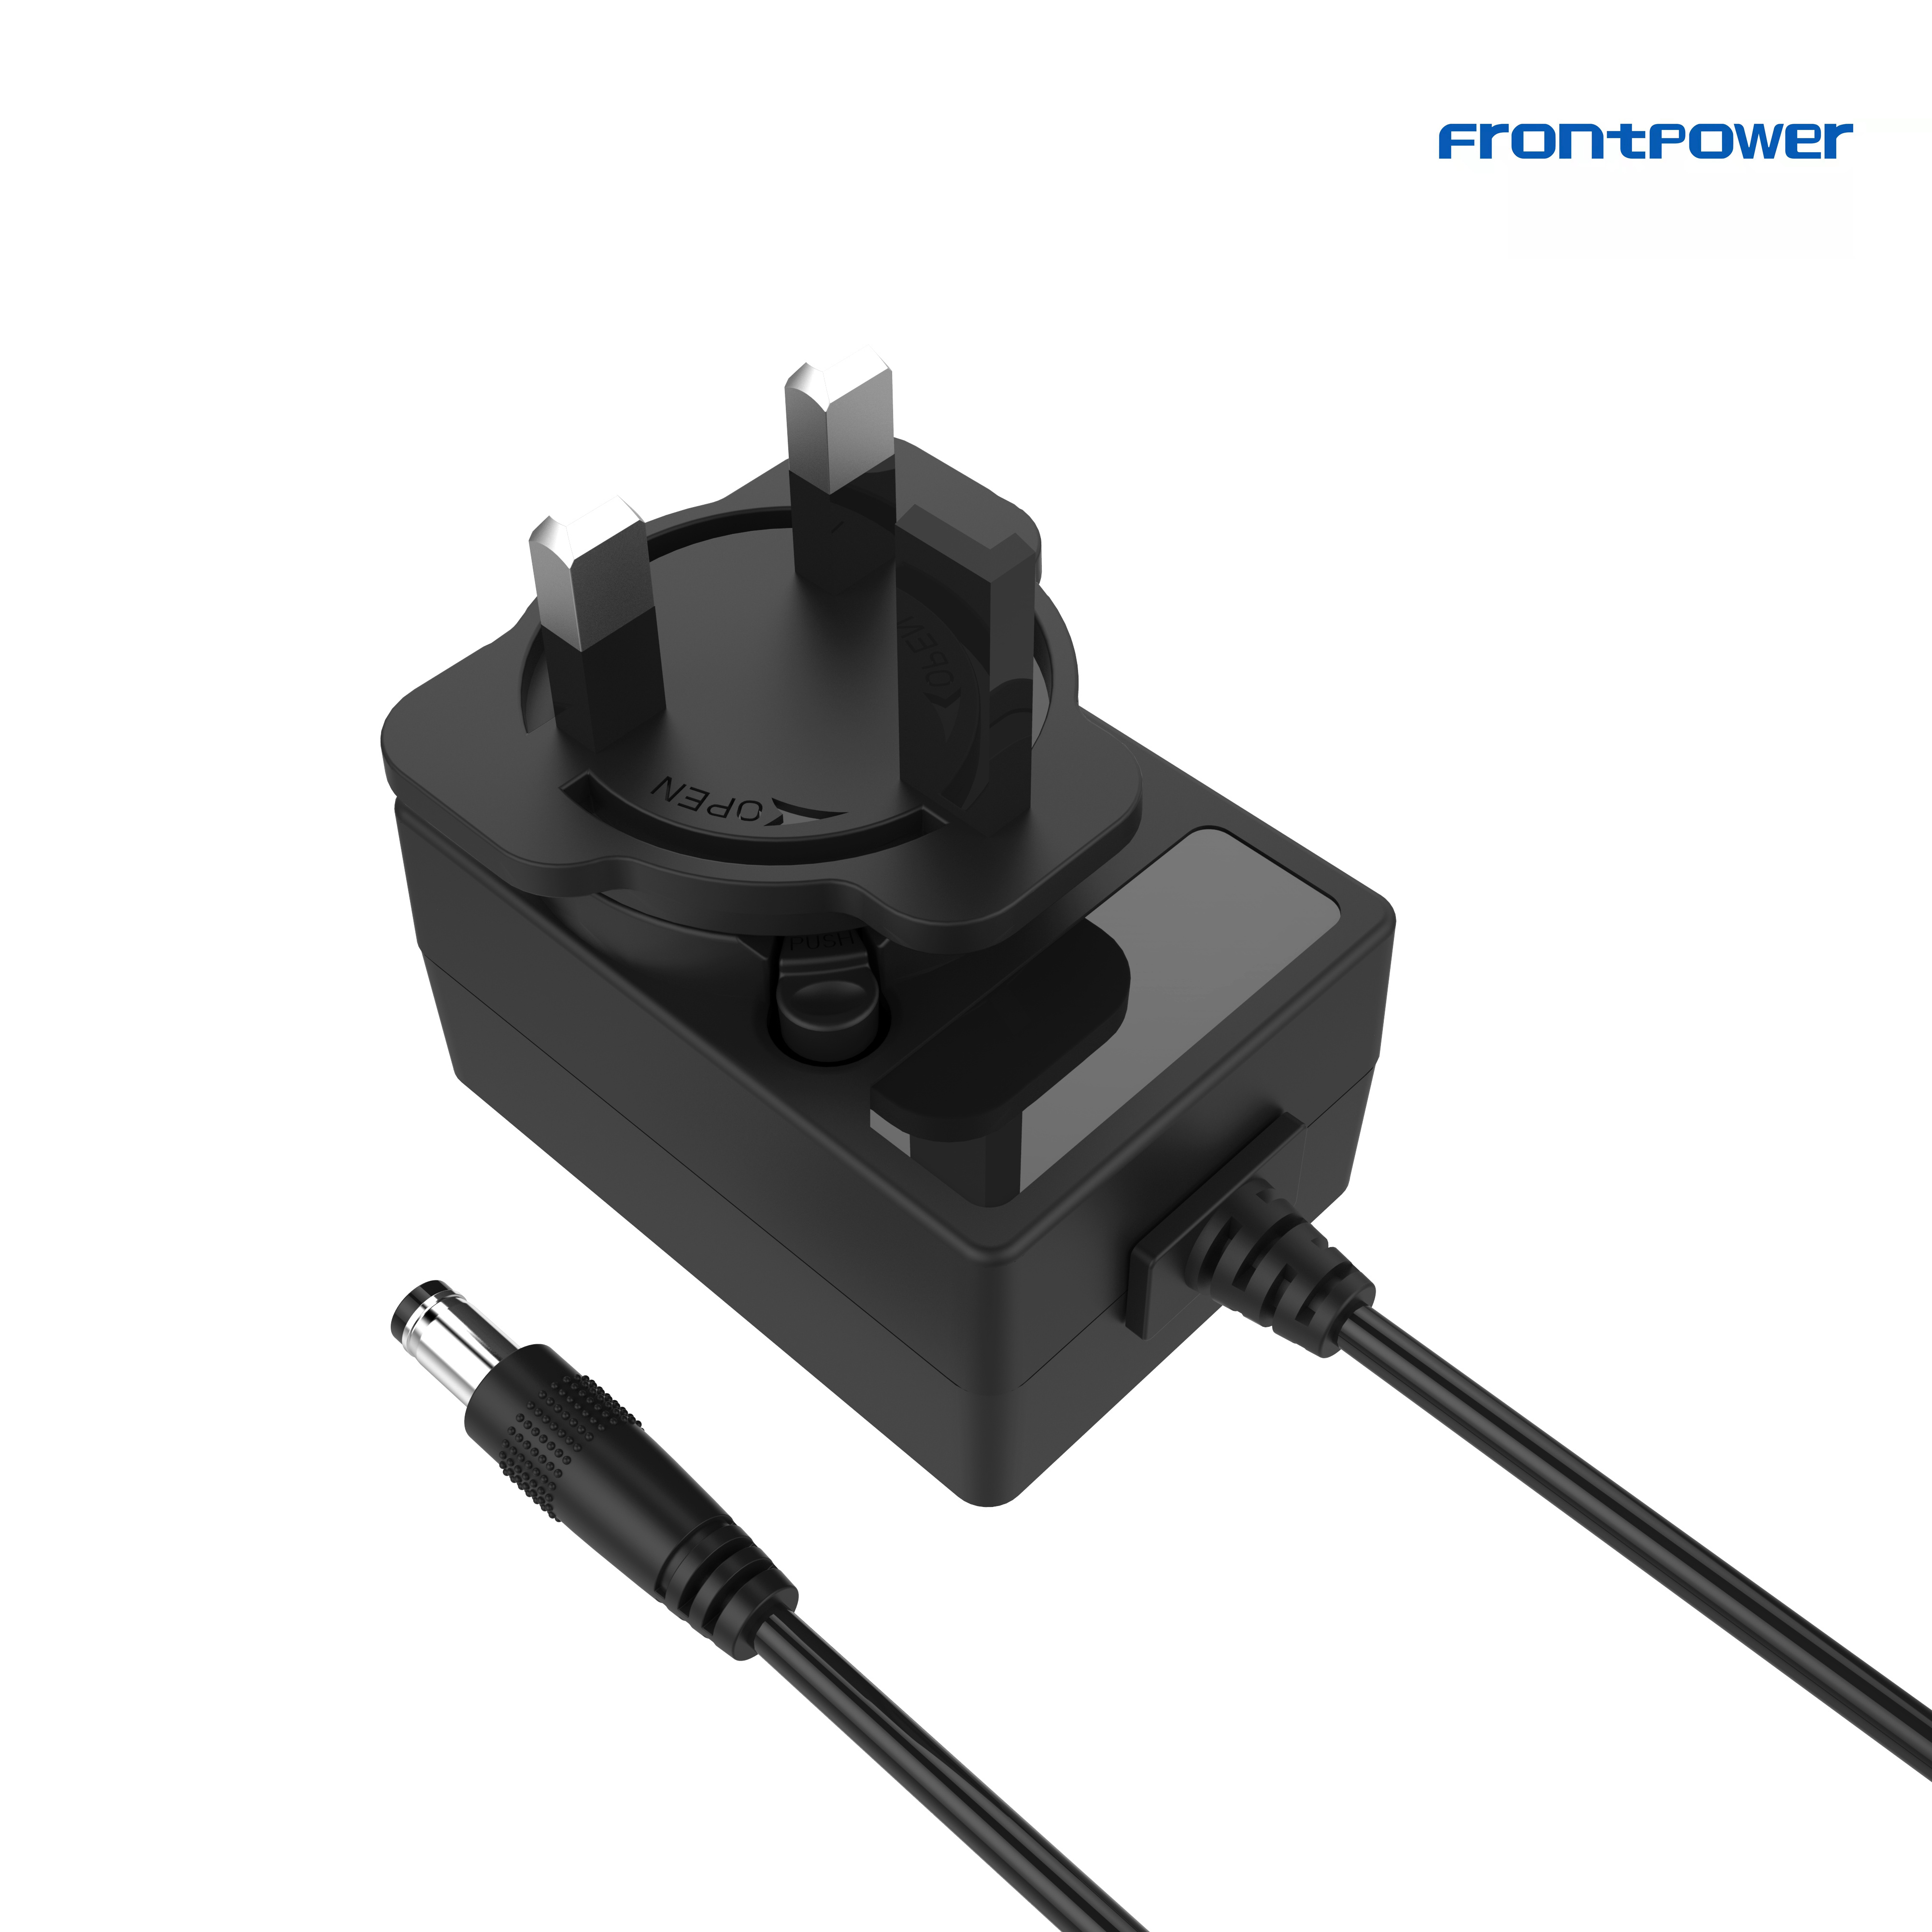 Power Adapter 5V 1A 2A 2.4A 2.5A 3A interchangeable power adaptor with UL CB CE GS